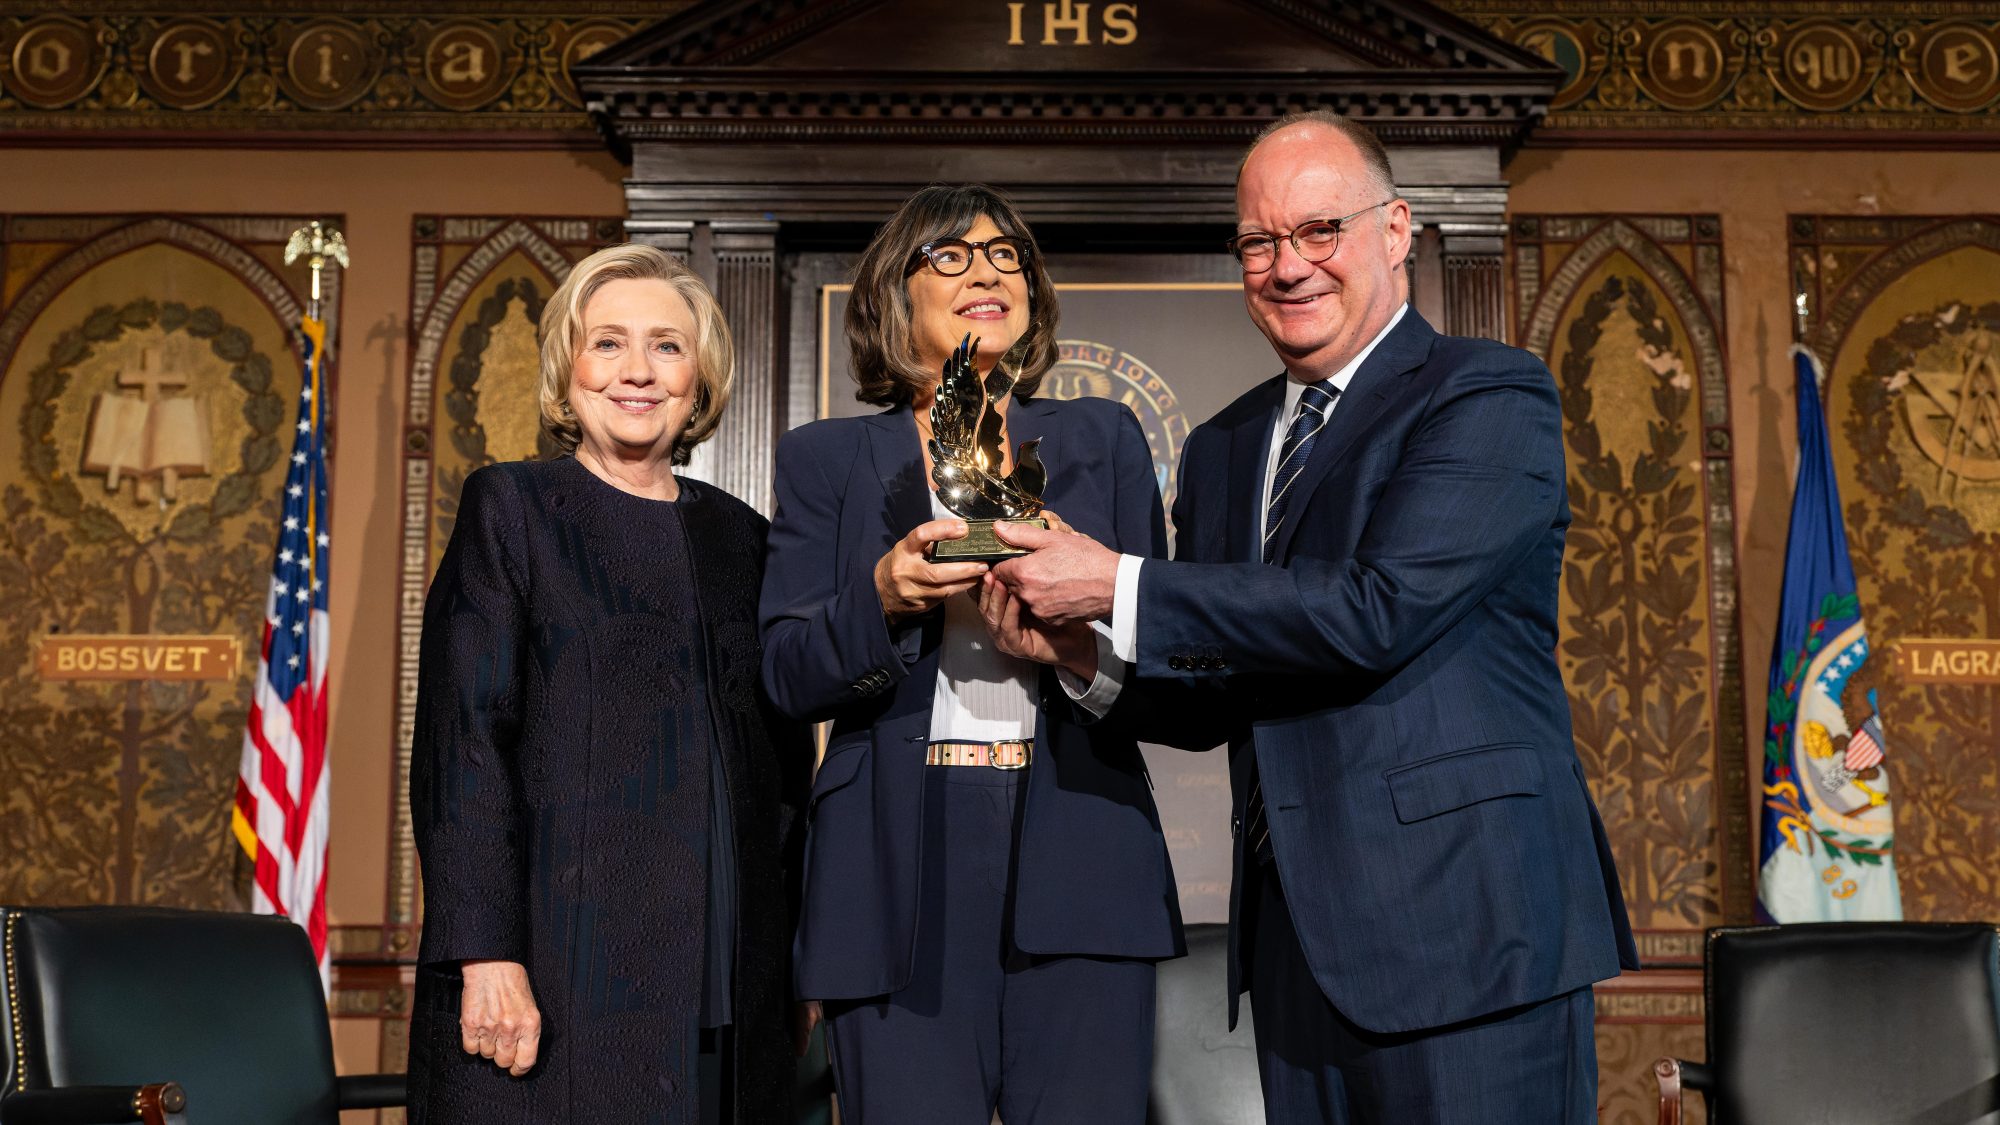 Hillary Clinton, Christiane Amanpour and Georgetown President John J. DeGioia stand on stage of Gaston Hall and Amanpour holds an award.